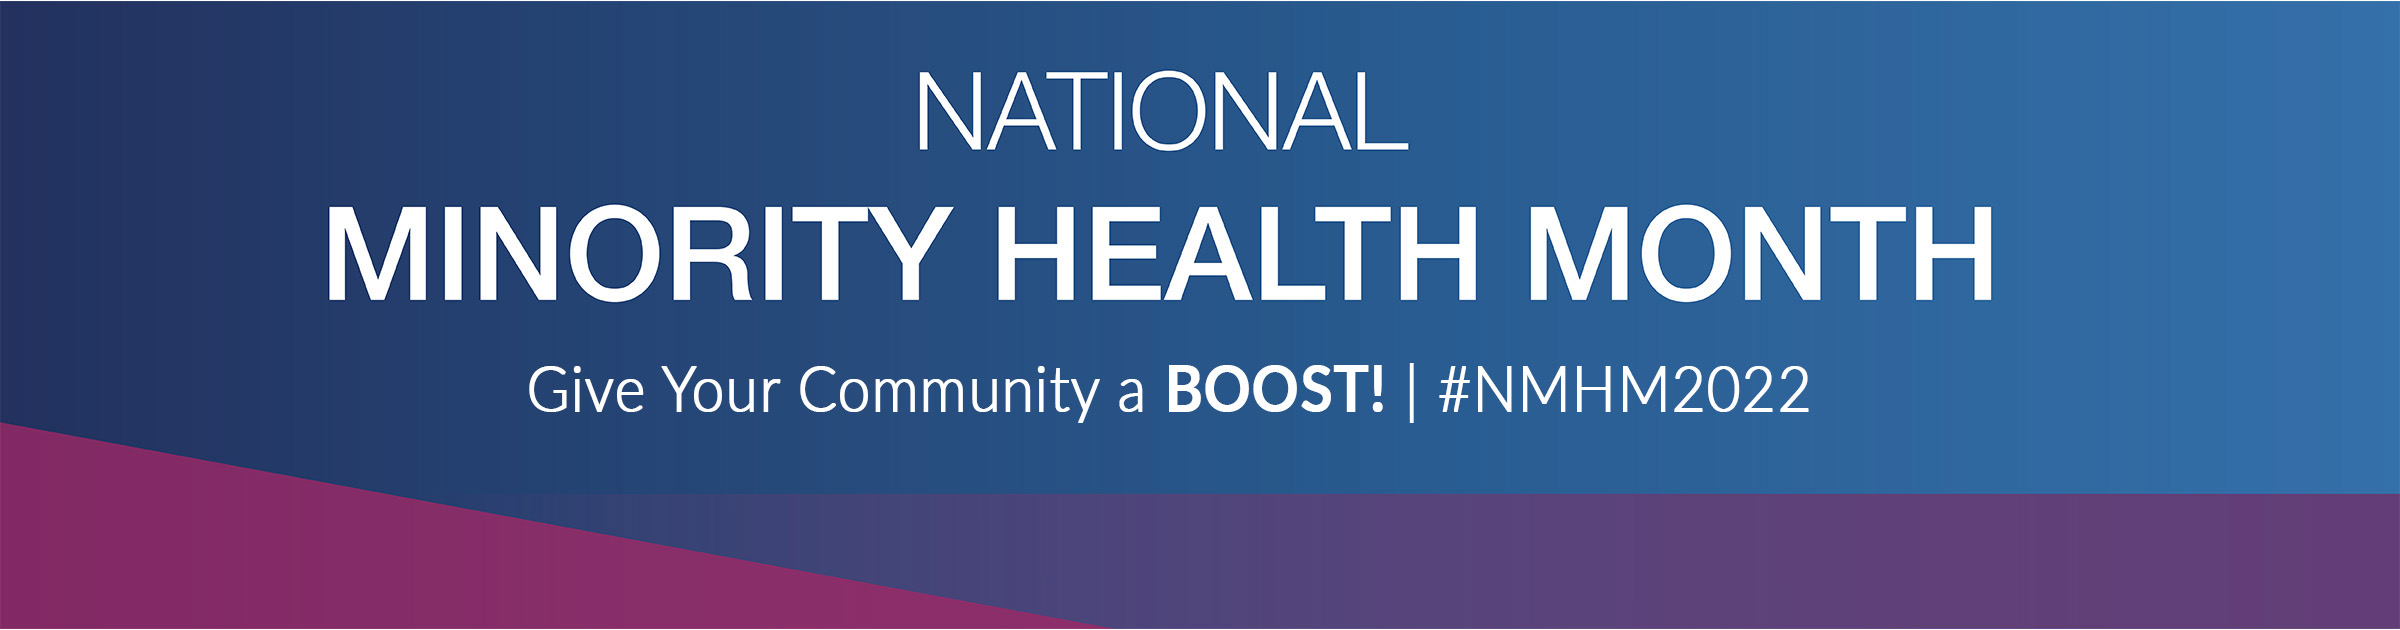 National Minority Health Month | #NMHM2022 | Give your community a BOOST!